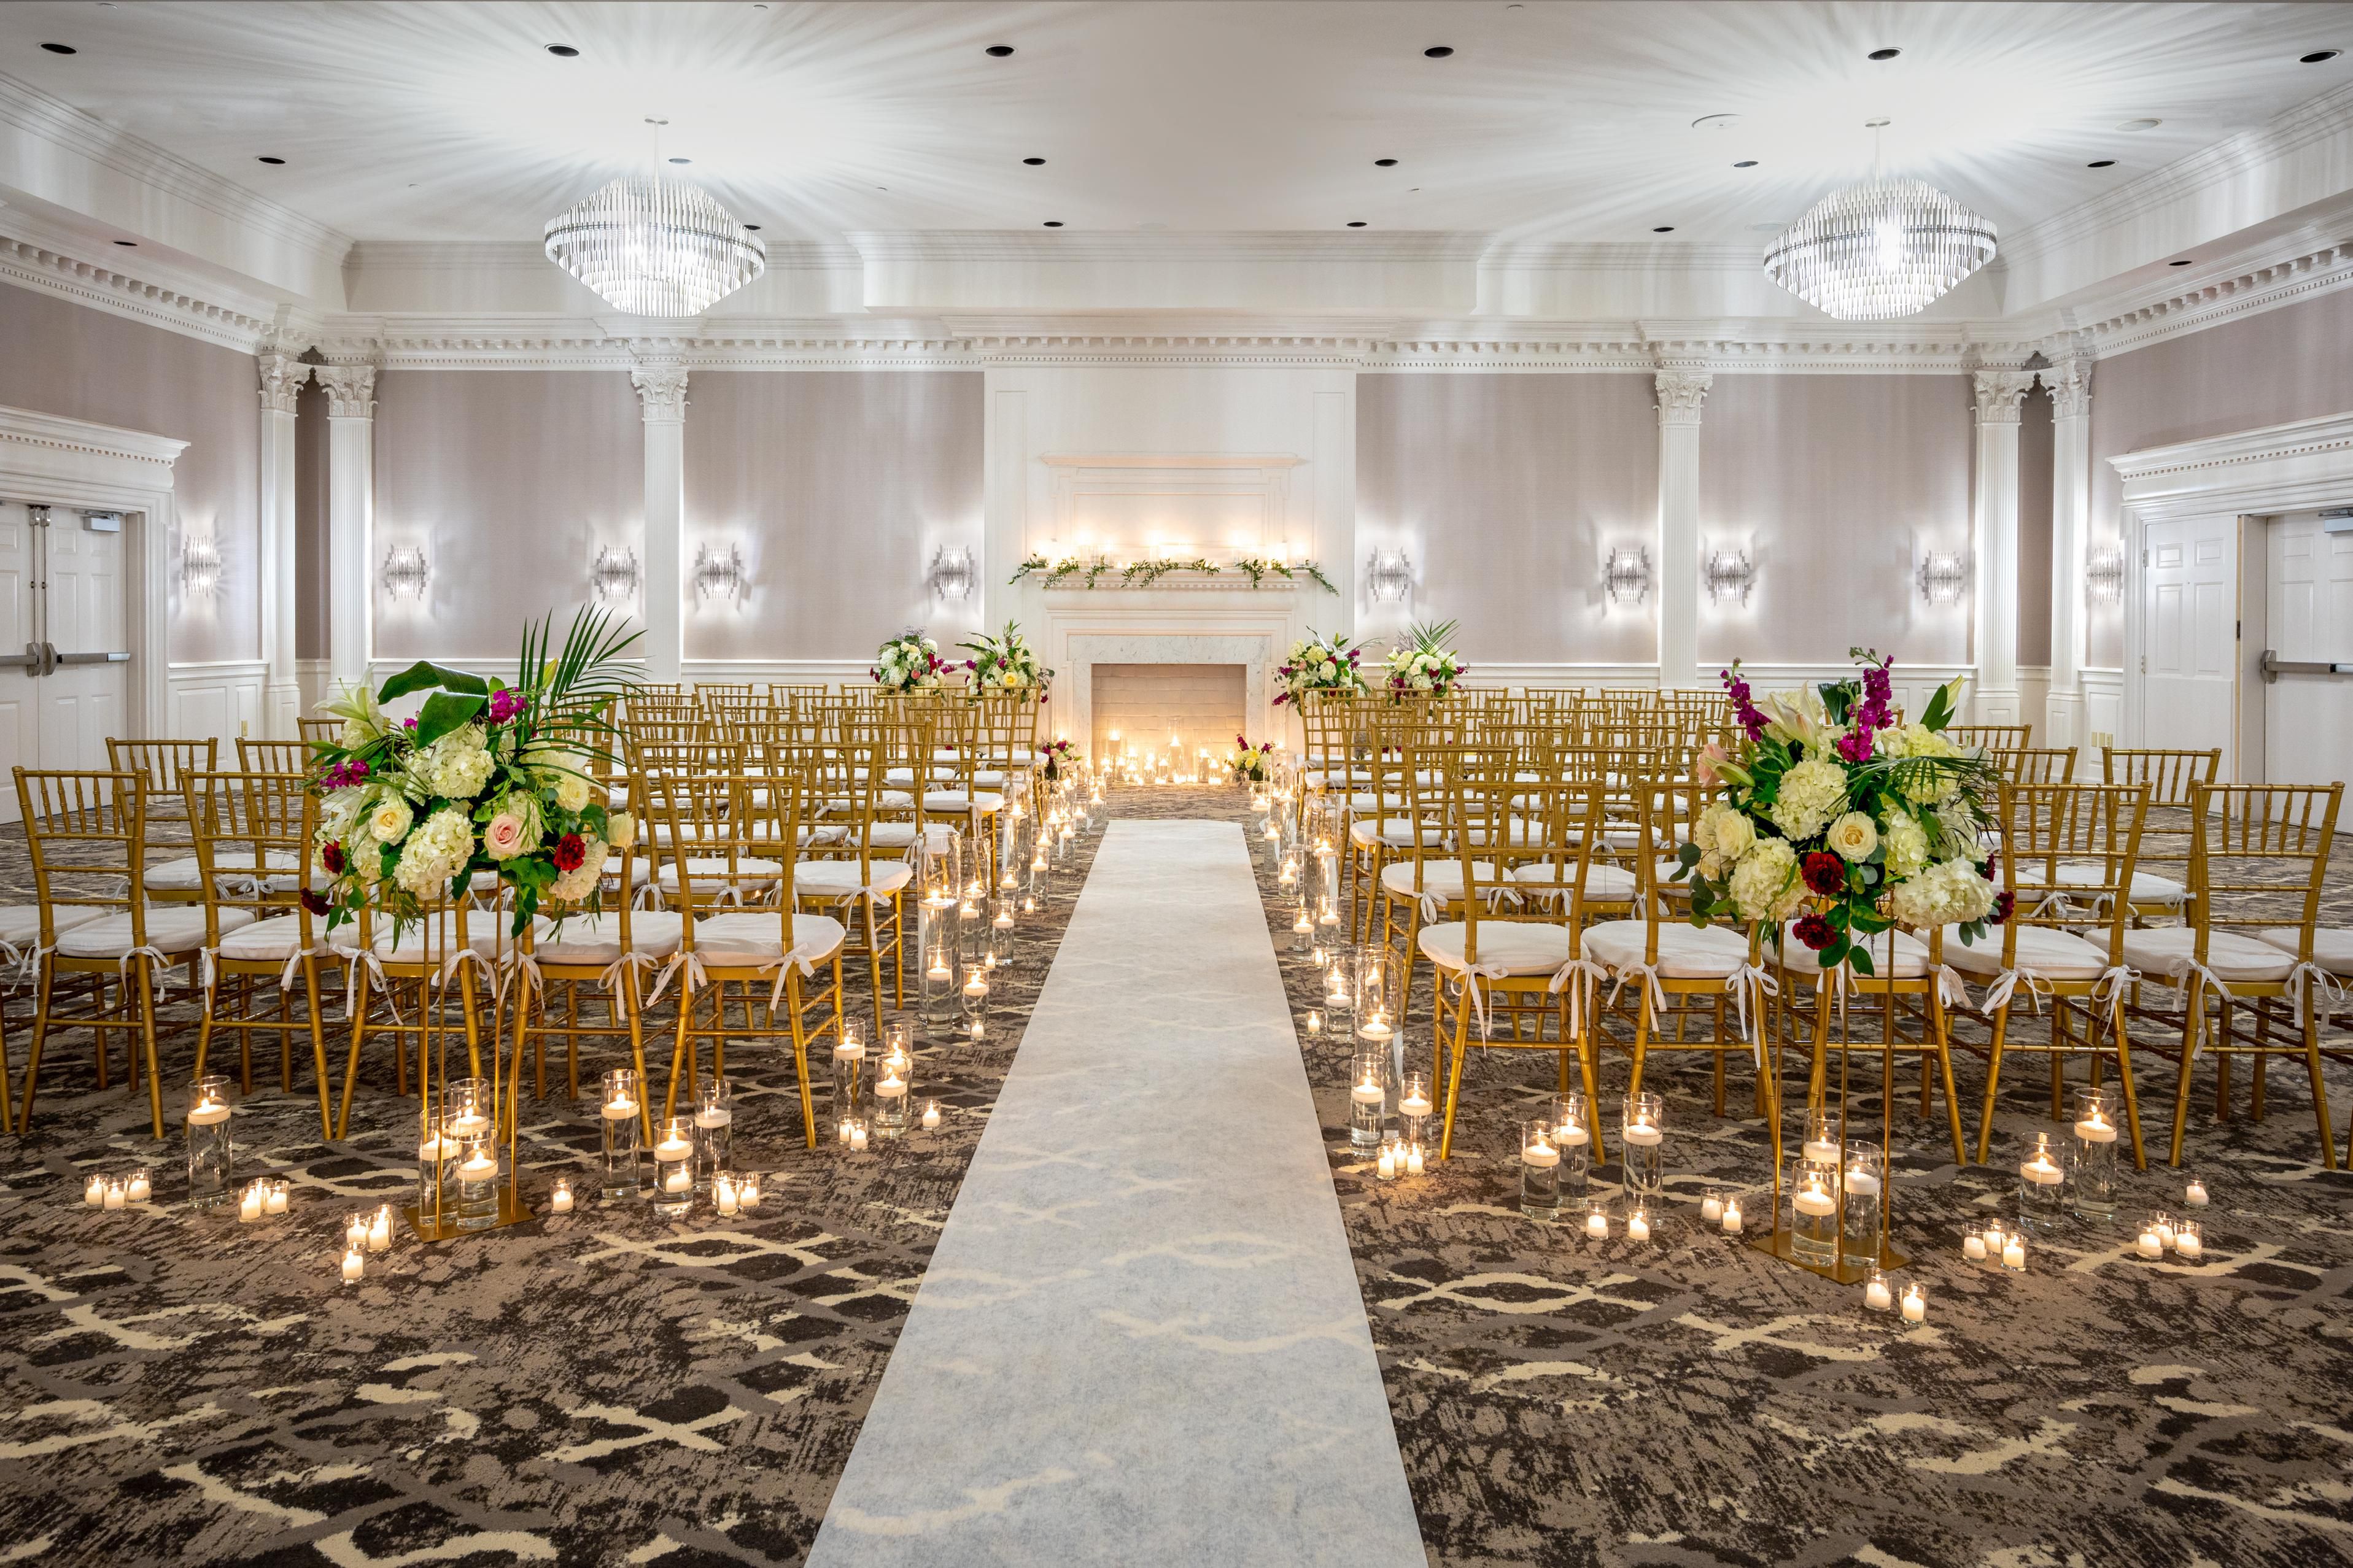 Our beautiful ballrooms are the perfect backdrop for your wedding